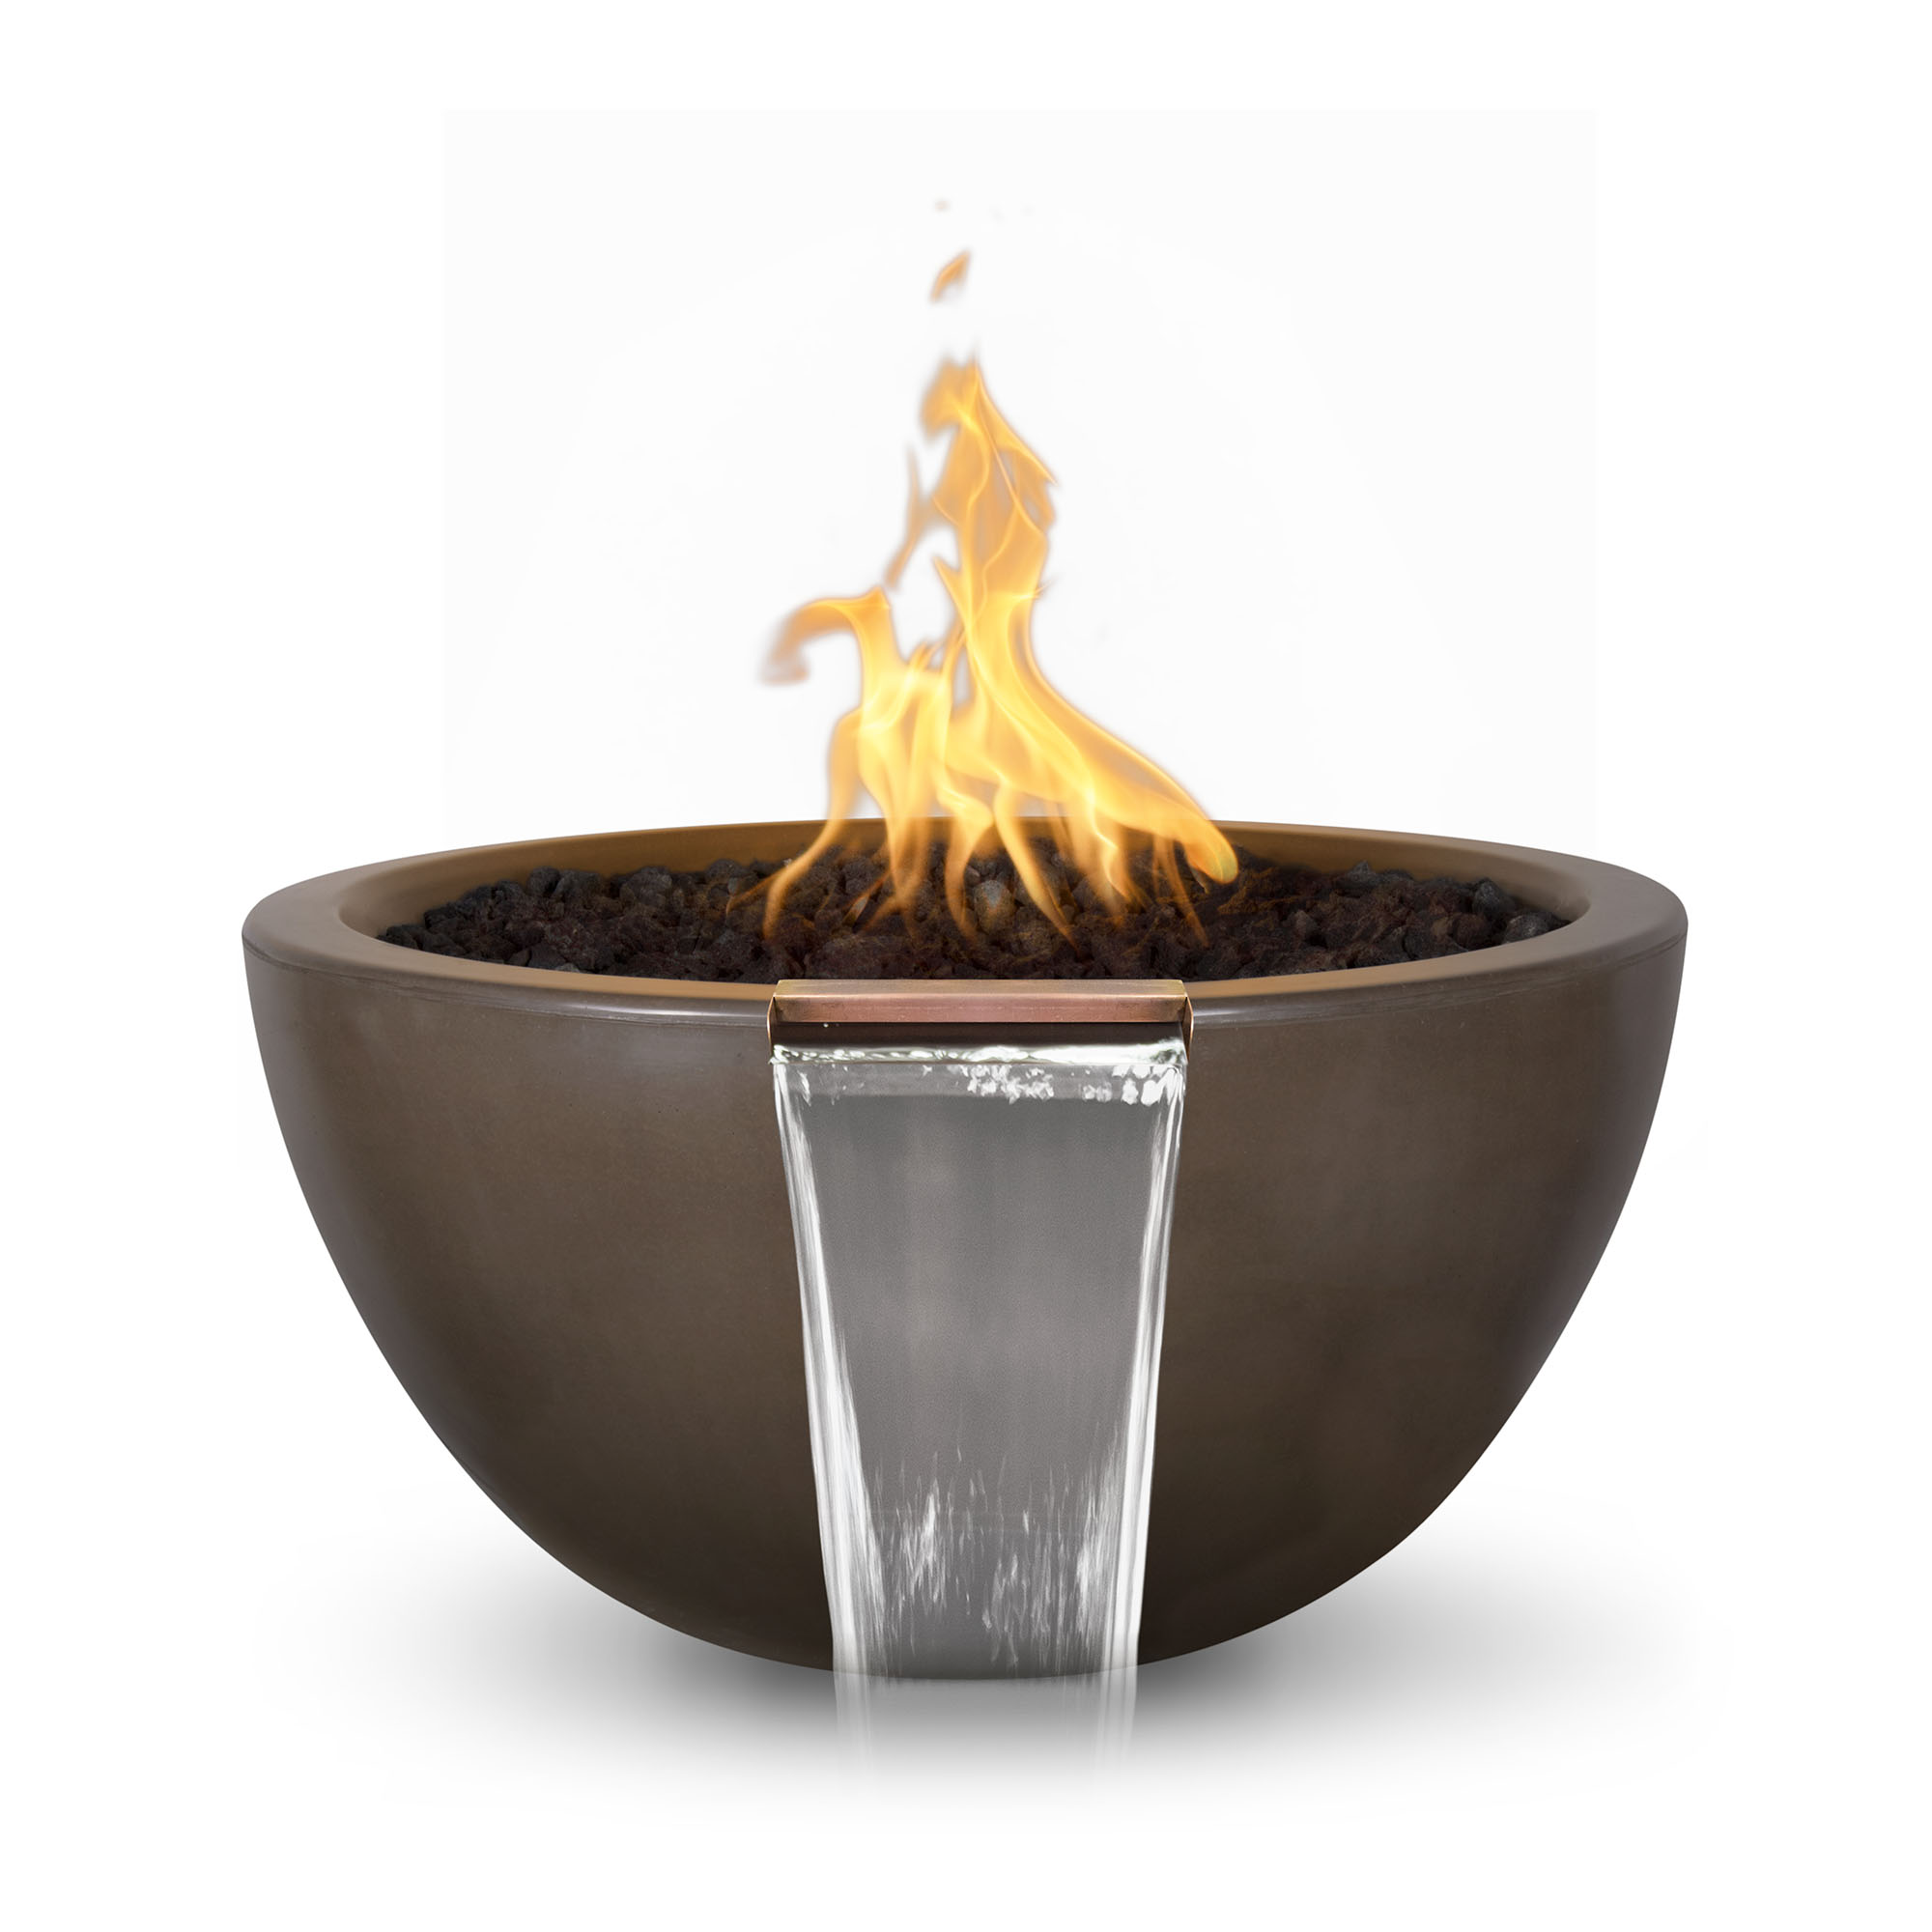 Luna Concrete GFRC Fire and Water Bowl - Chocolate